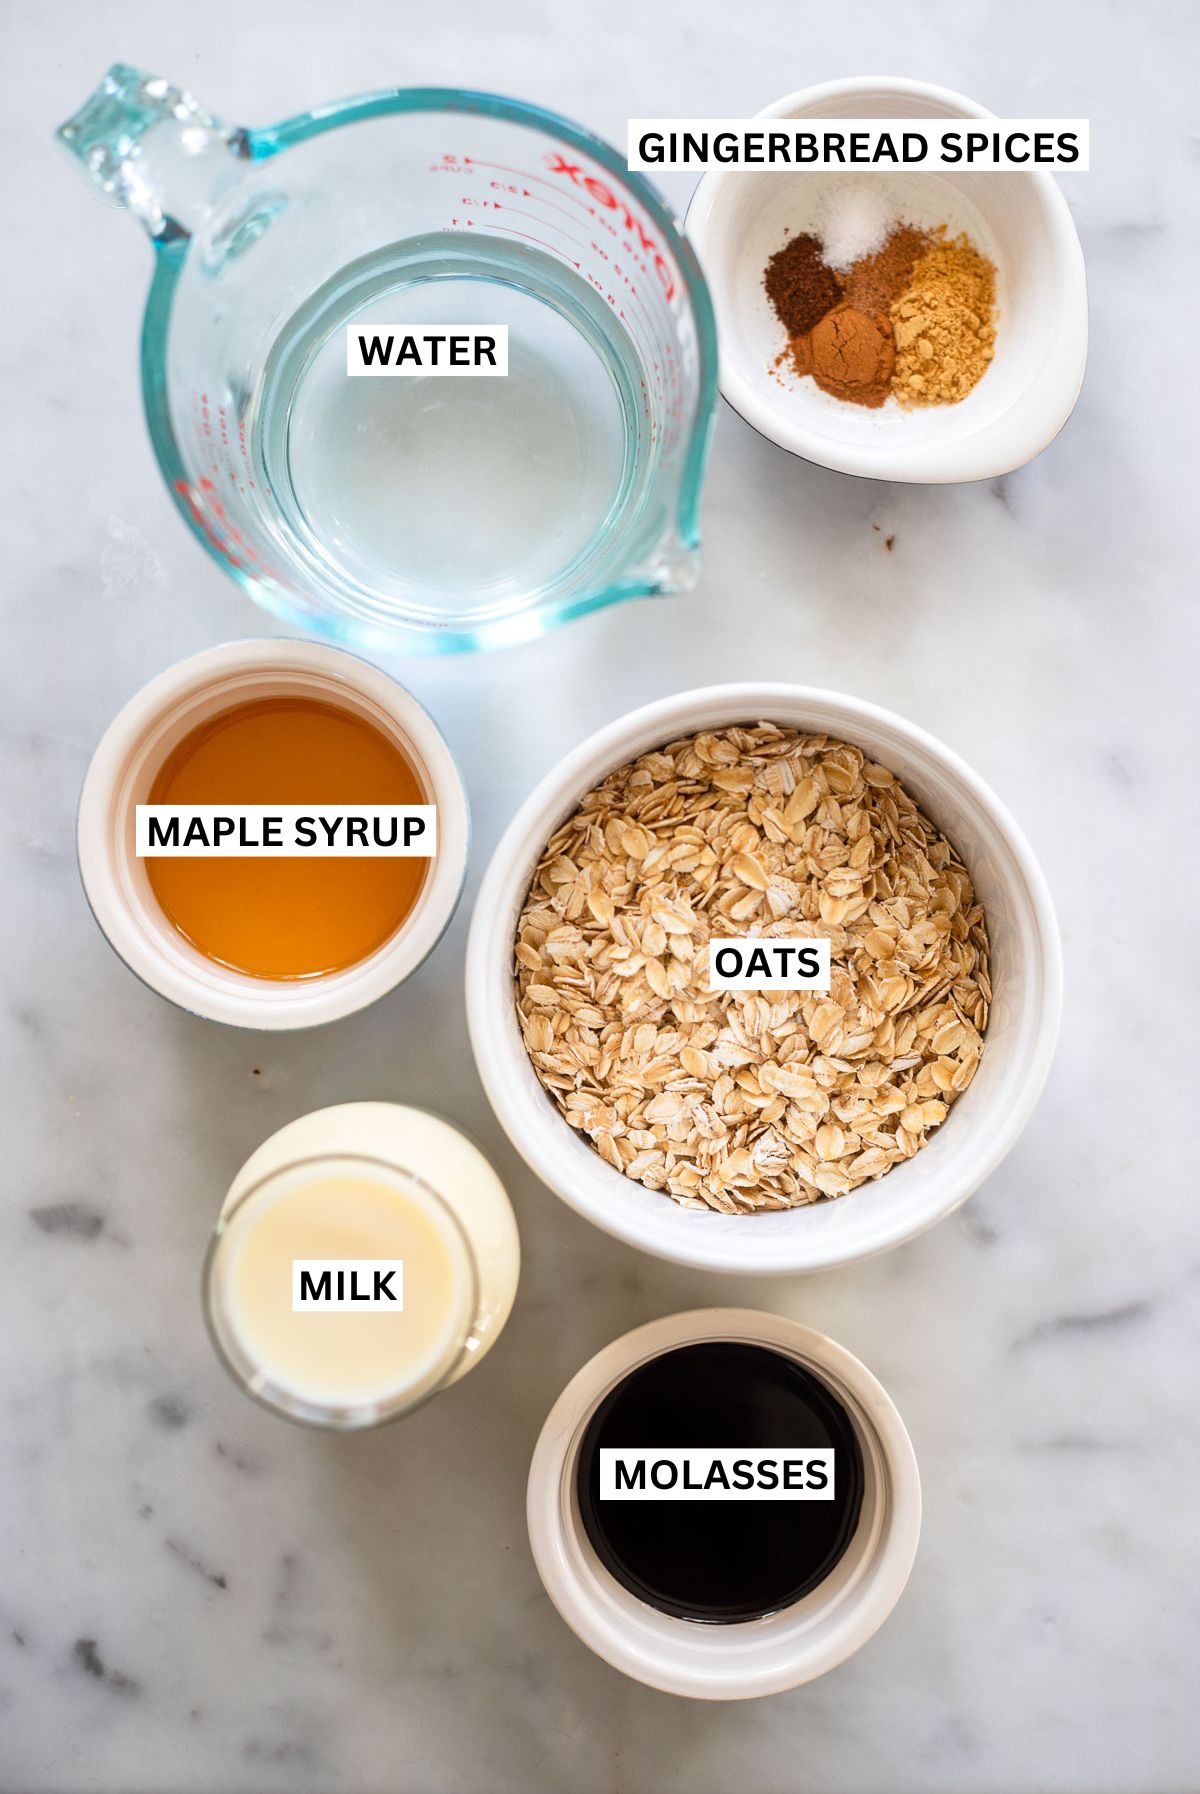 Gingerbread oatmeal ingredients in small bowls with labels.